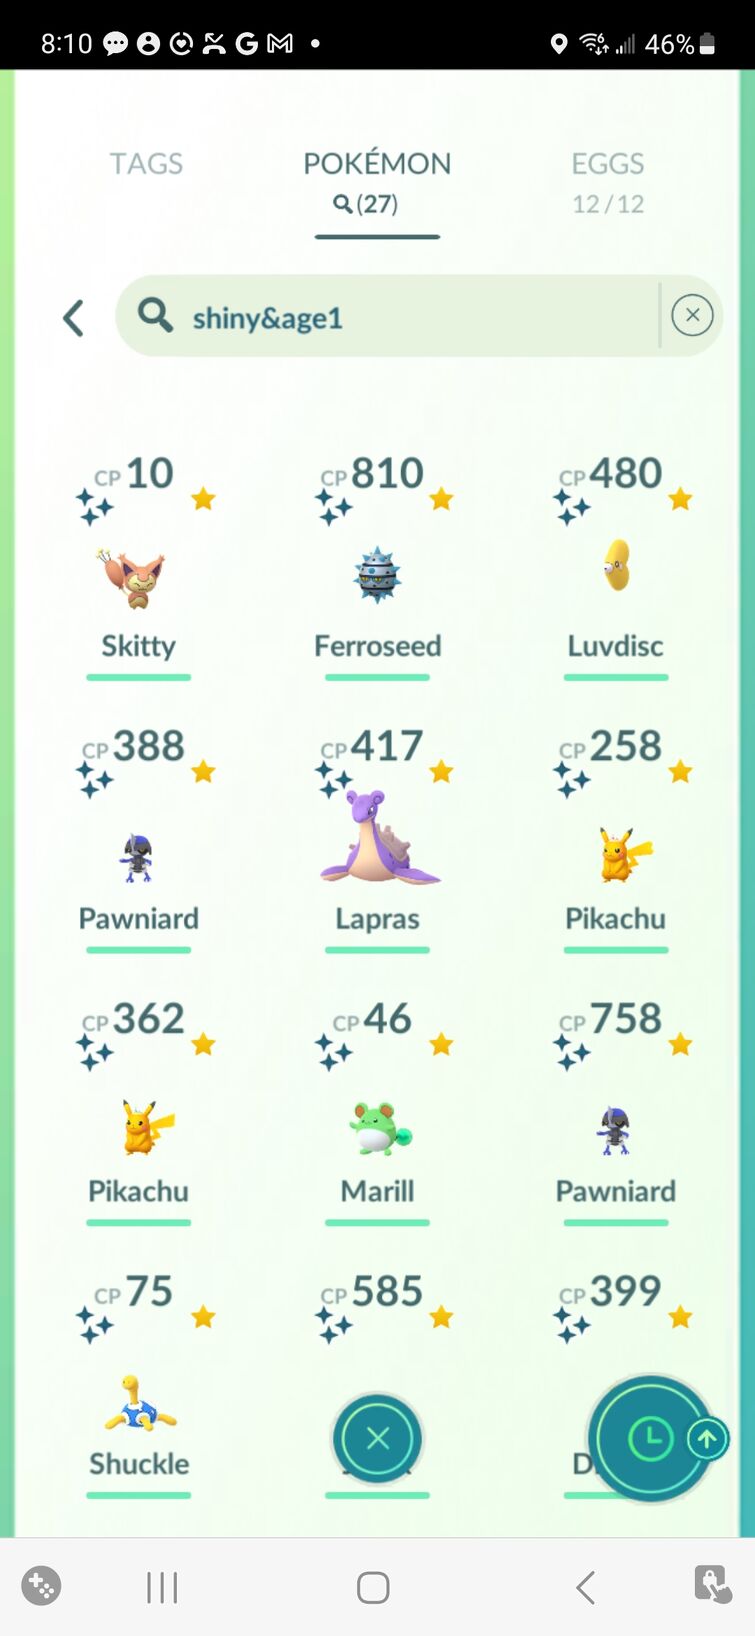 Pokemon Go Complete shiny checklist. Feel free to use to help track shines,  luckys and more :) : r/pokemongo